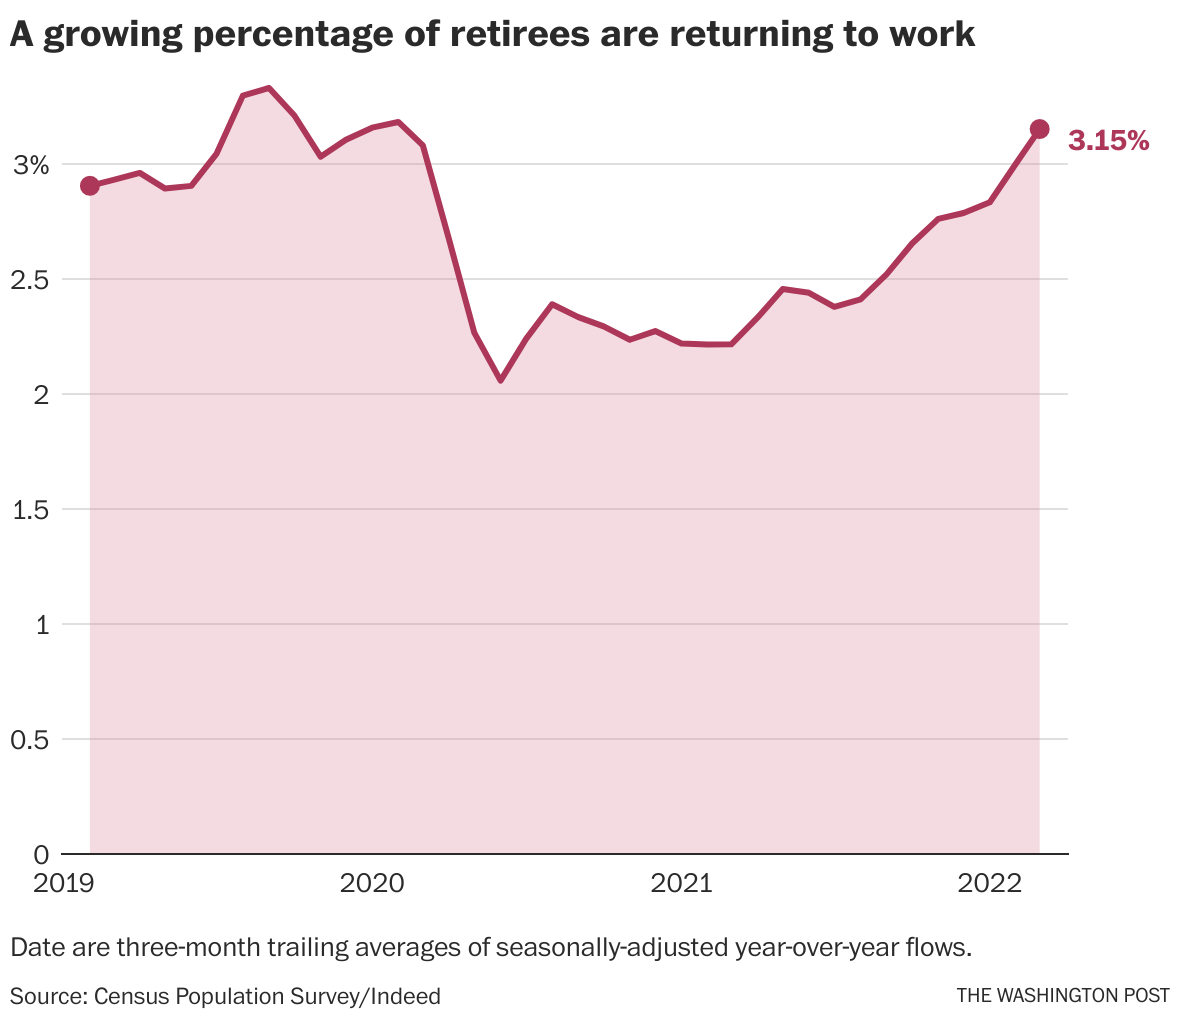 Amid the pandemic, a rising share of older U.S. adults are now retired